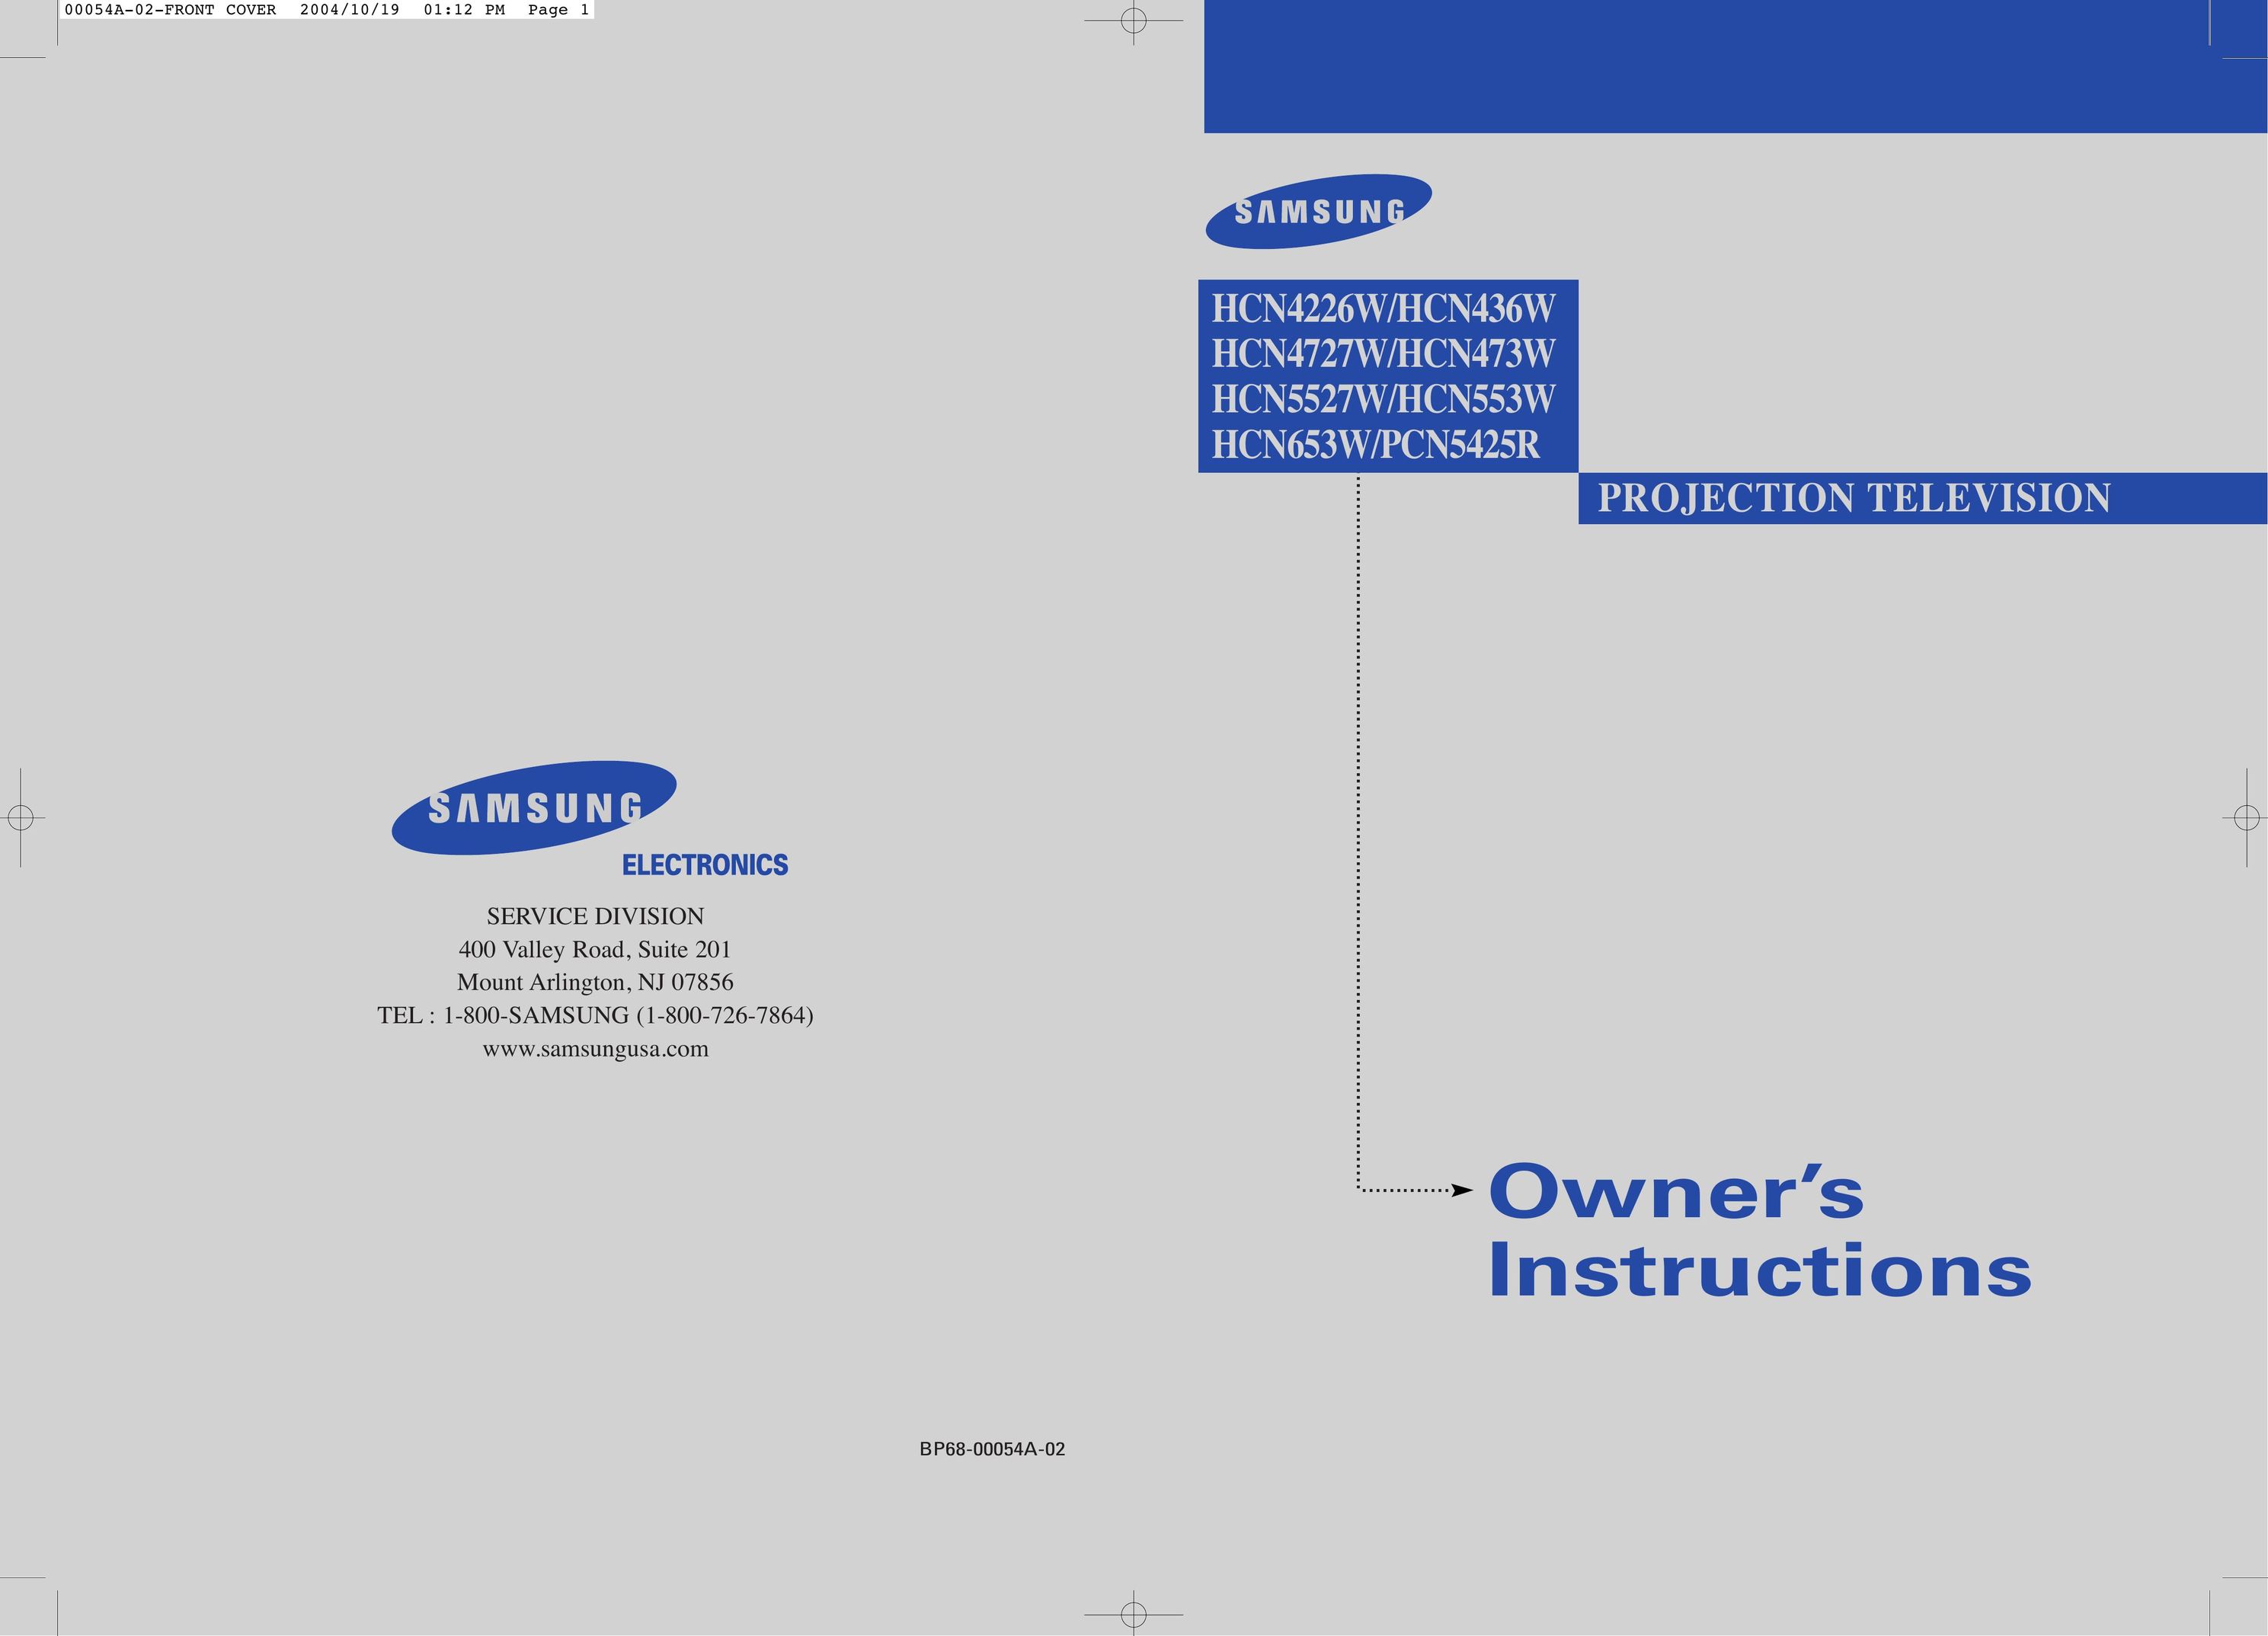 Samsung HCN4727W Projection Television User Manual